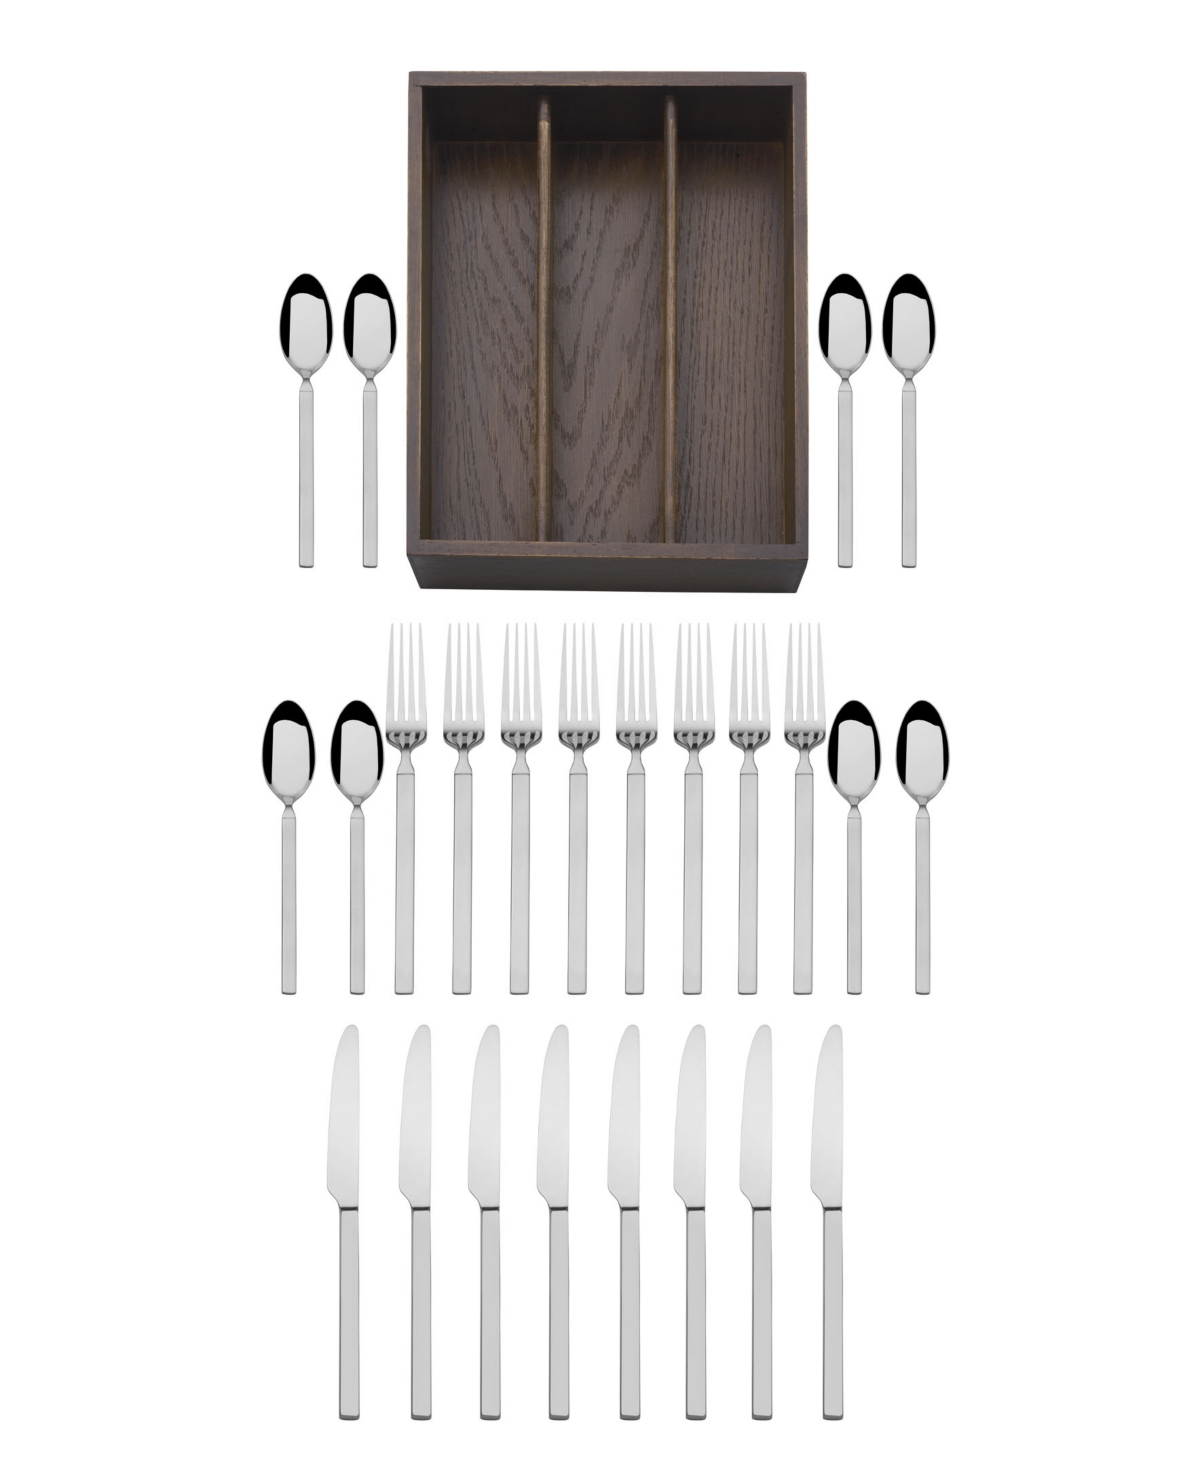 Mikasa Living Arlo 18.0 Stainless Steel 24 Piece Flatware Set, Service For 8 With Caddy